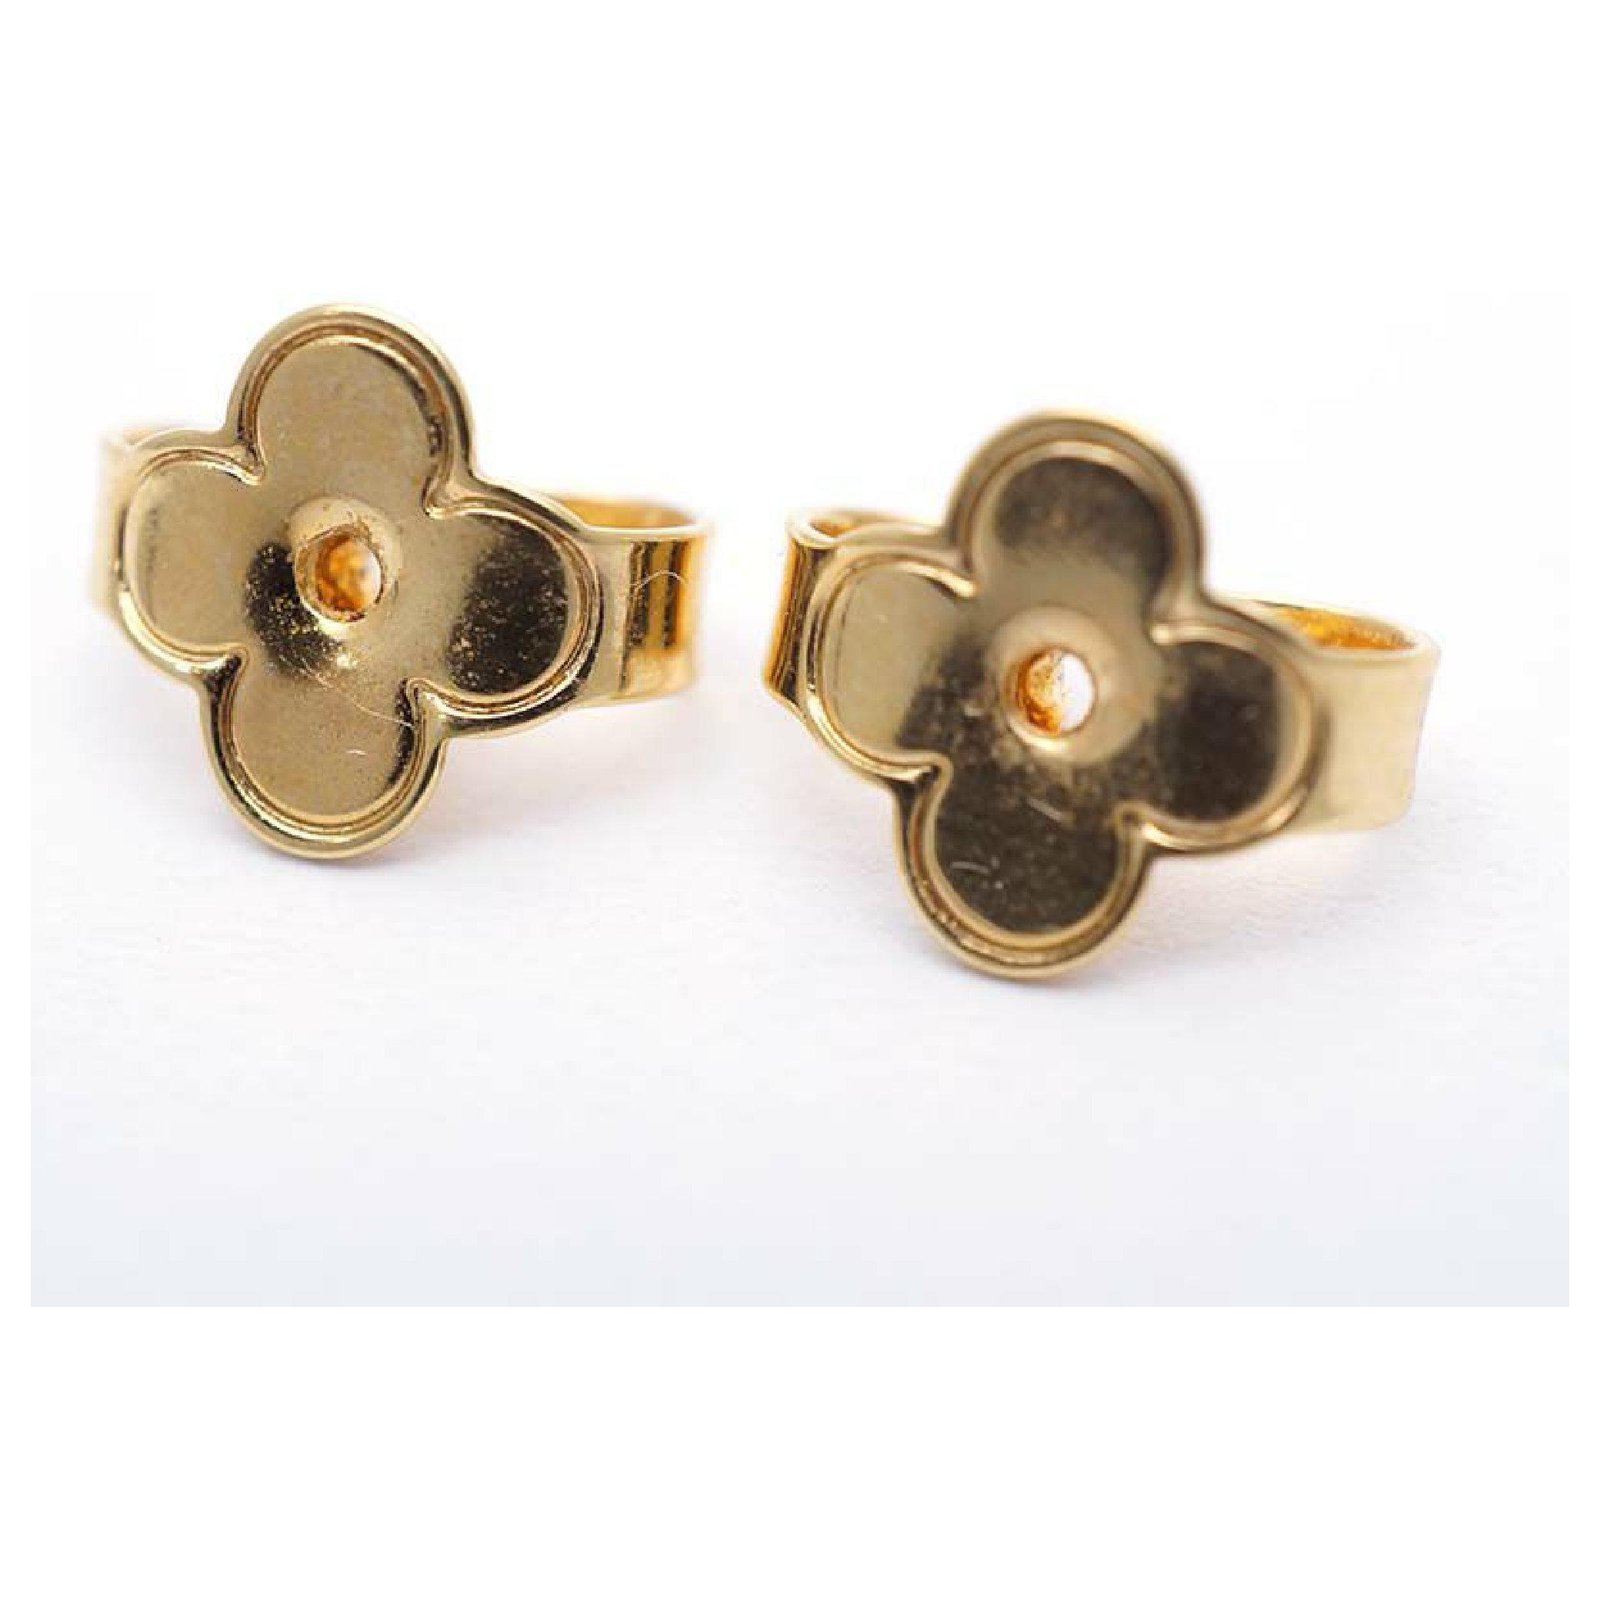 LOUIS VUITTON LOUIS VUITTON Boucle d'oreille Blooming Pierced earrings Gold  Plated Used LV M64859｜Product Code：2107600883052｜BRAND OFF Online Store